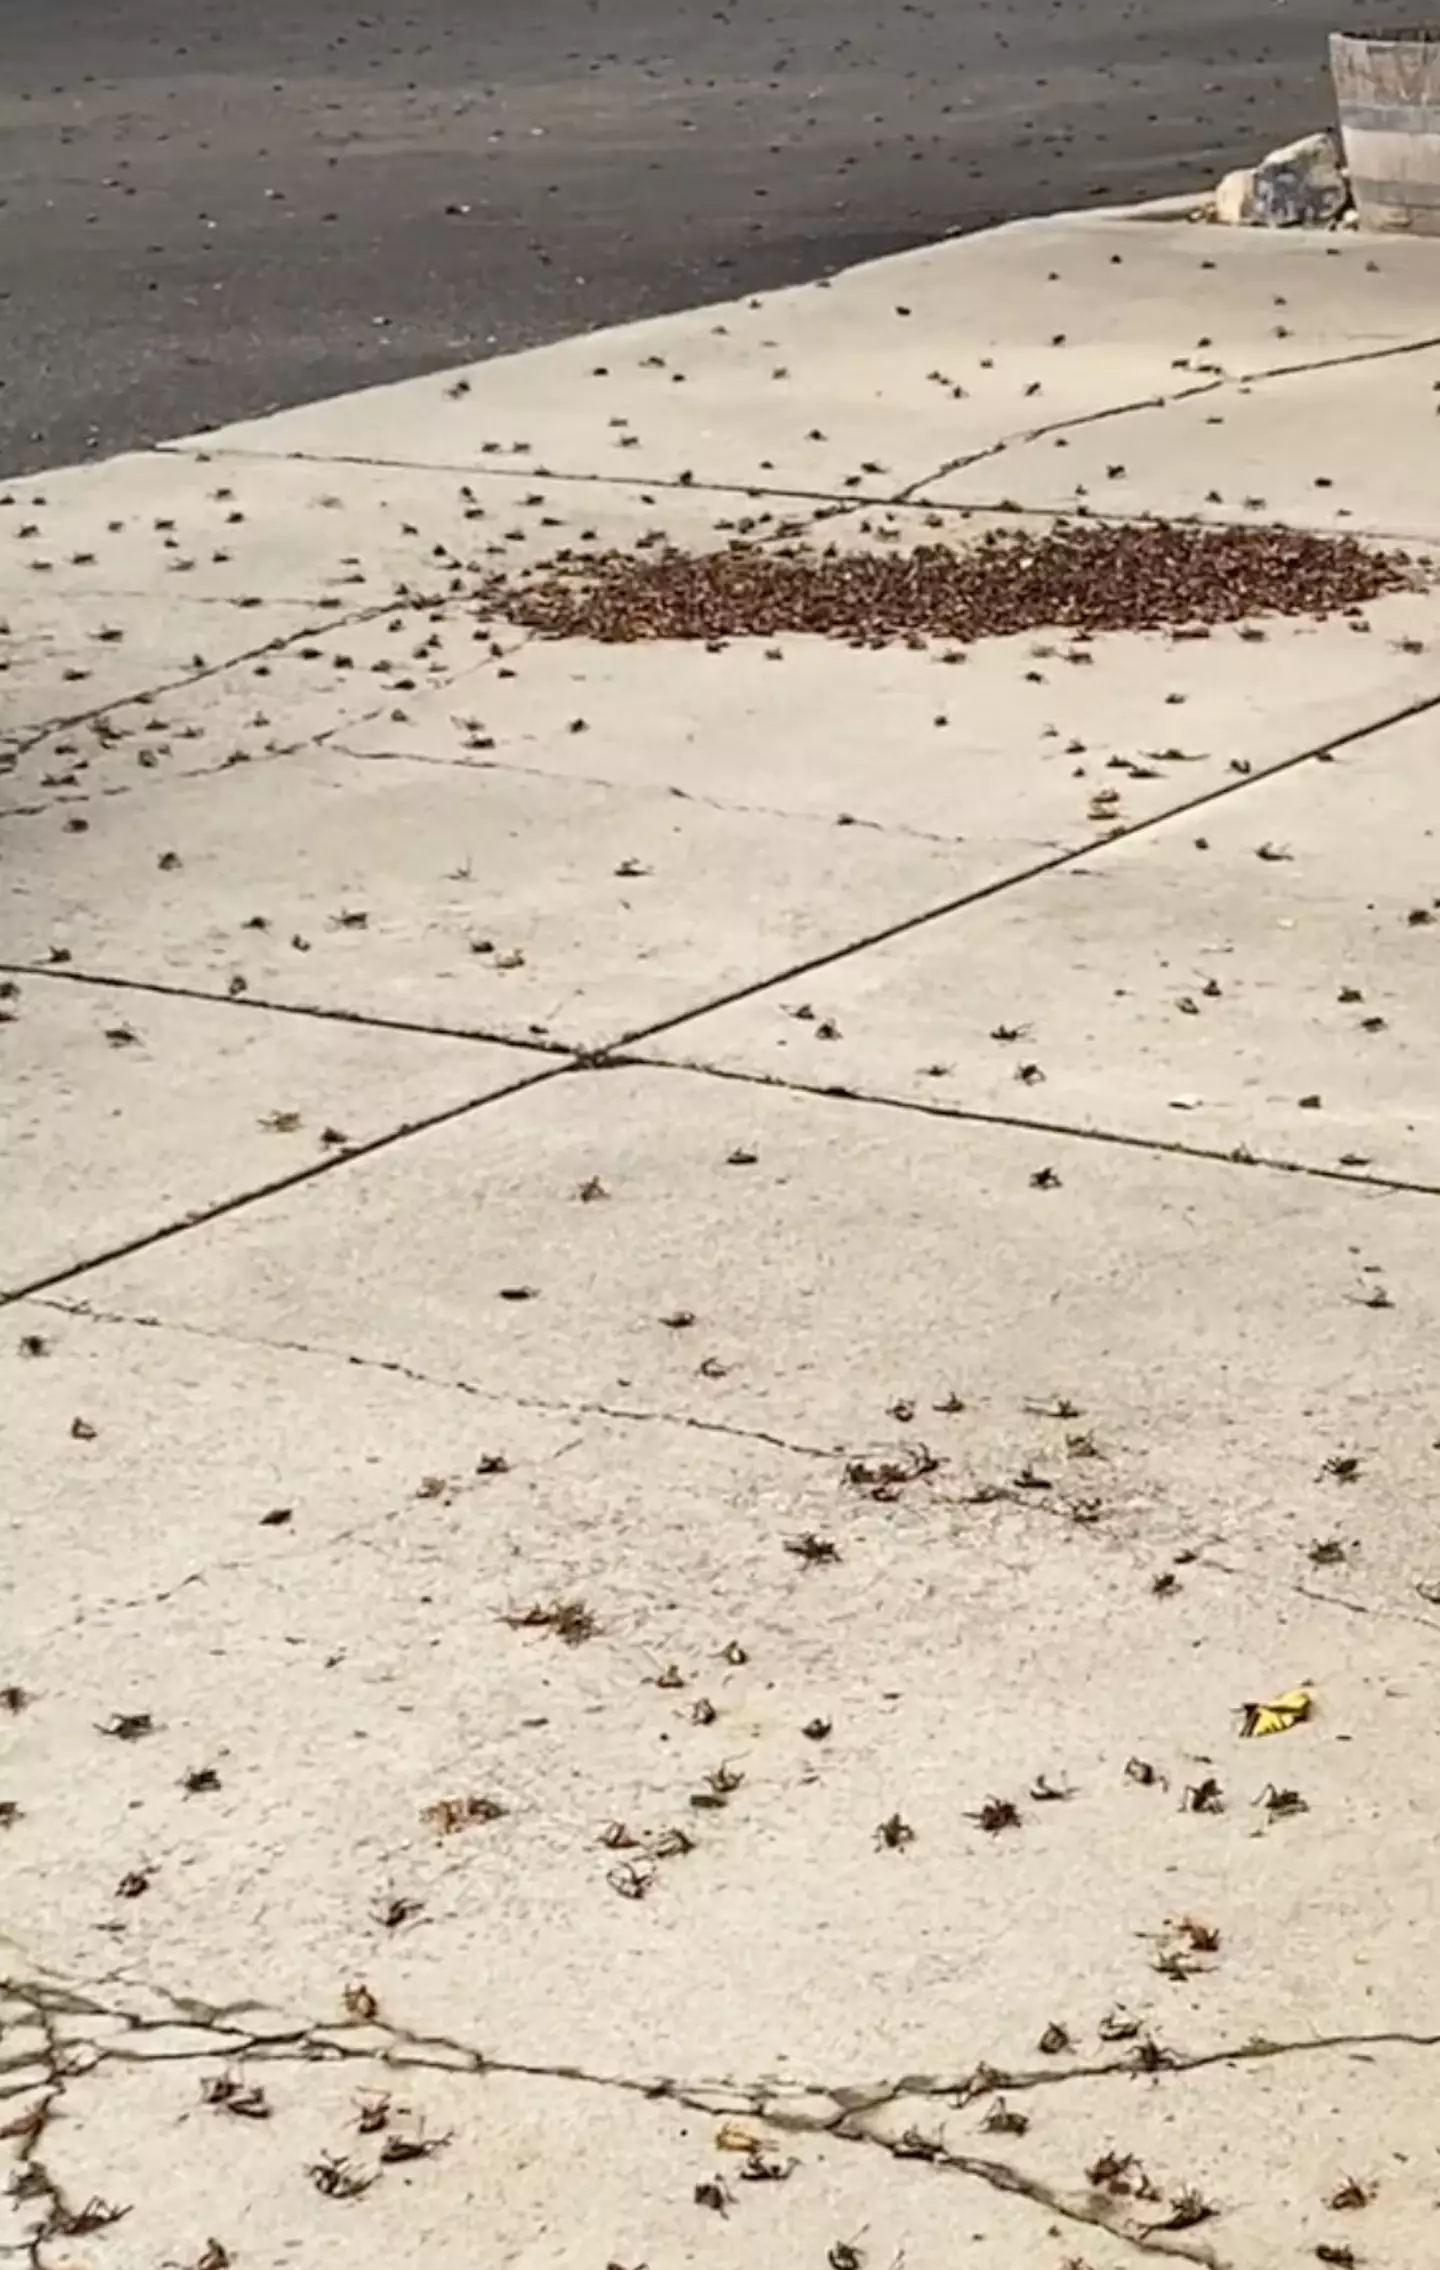 Millions of Mormon crickets have flooded the city.